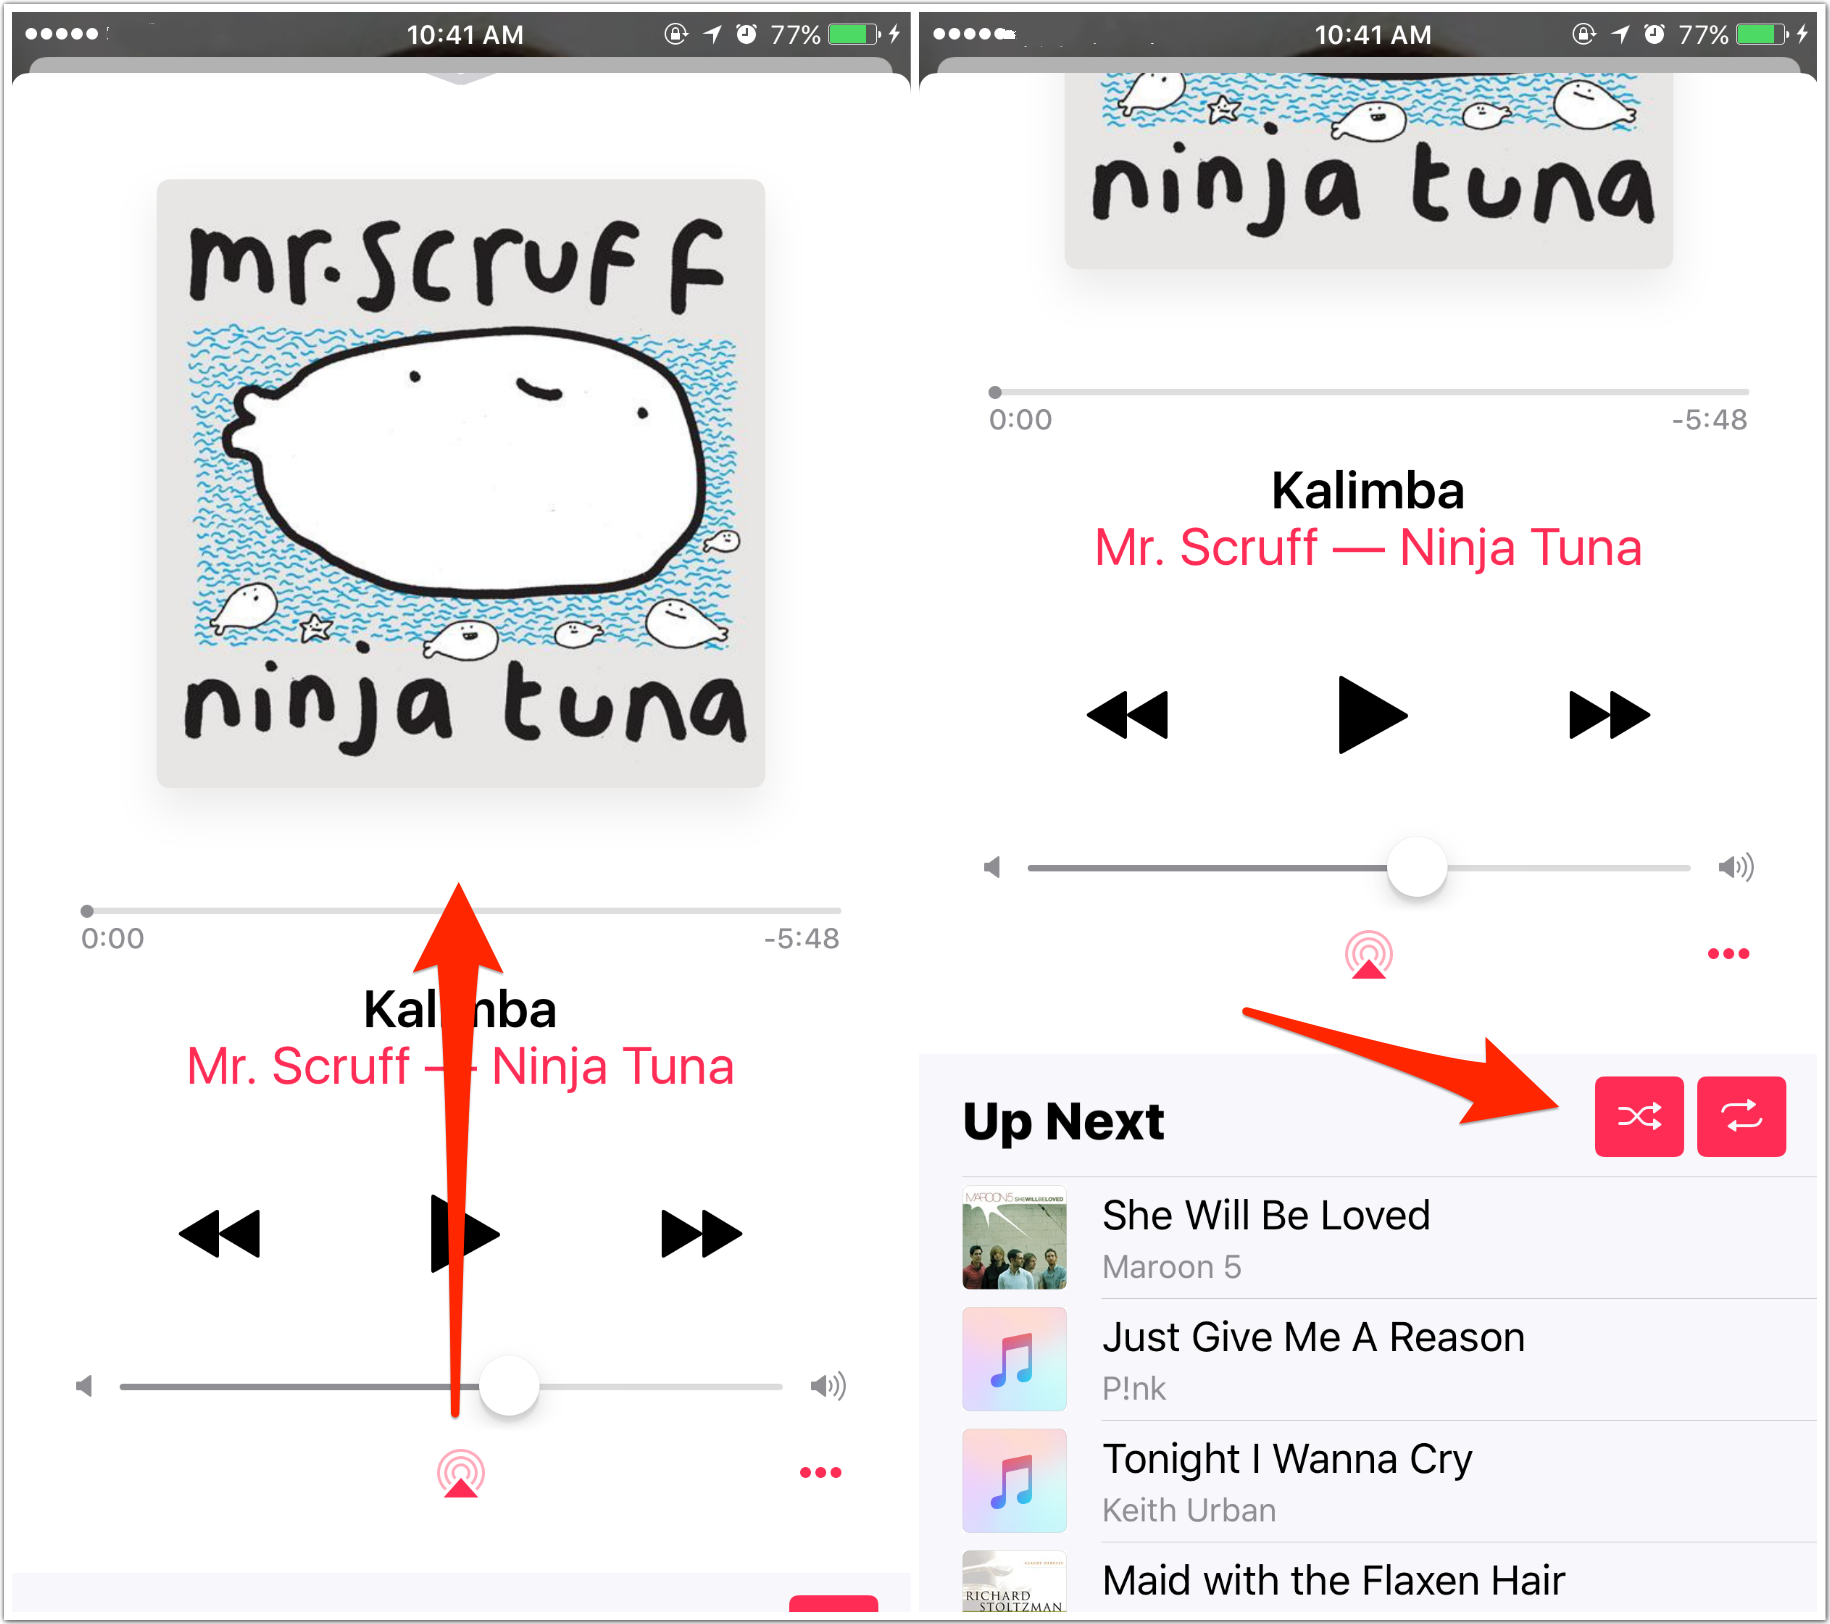 How to Repeat a Song and Turn Off Repeat on iOS 10 - iMobie